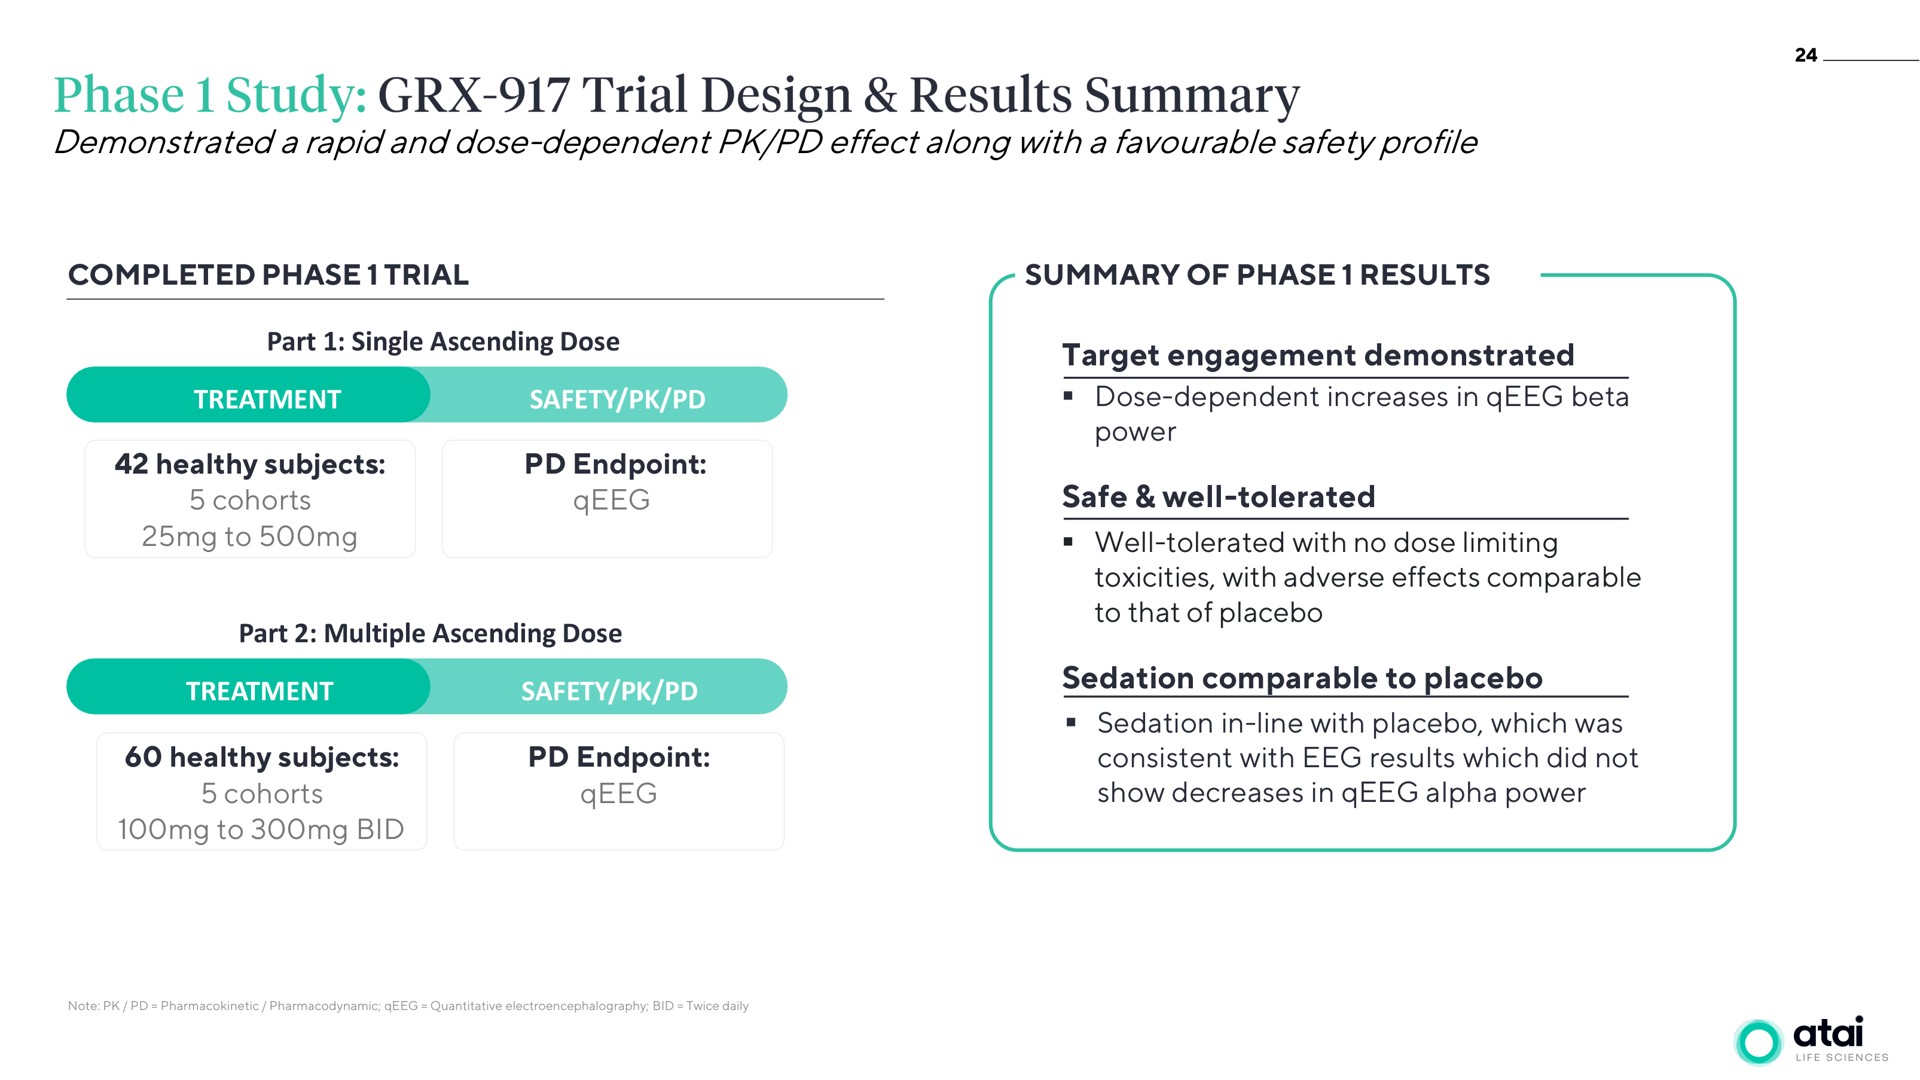 demonstrated a rapid and dose dependent effect along with a safety profile phase study trial design results summary | ATAI